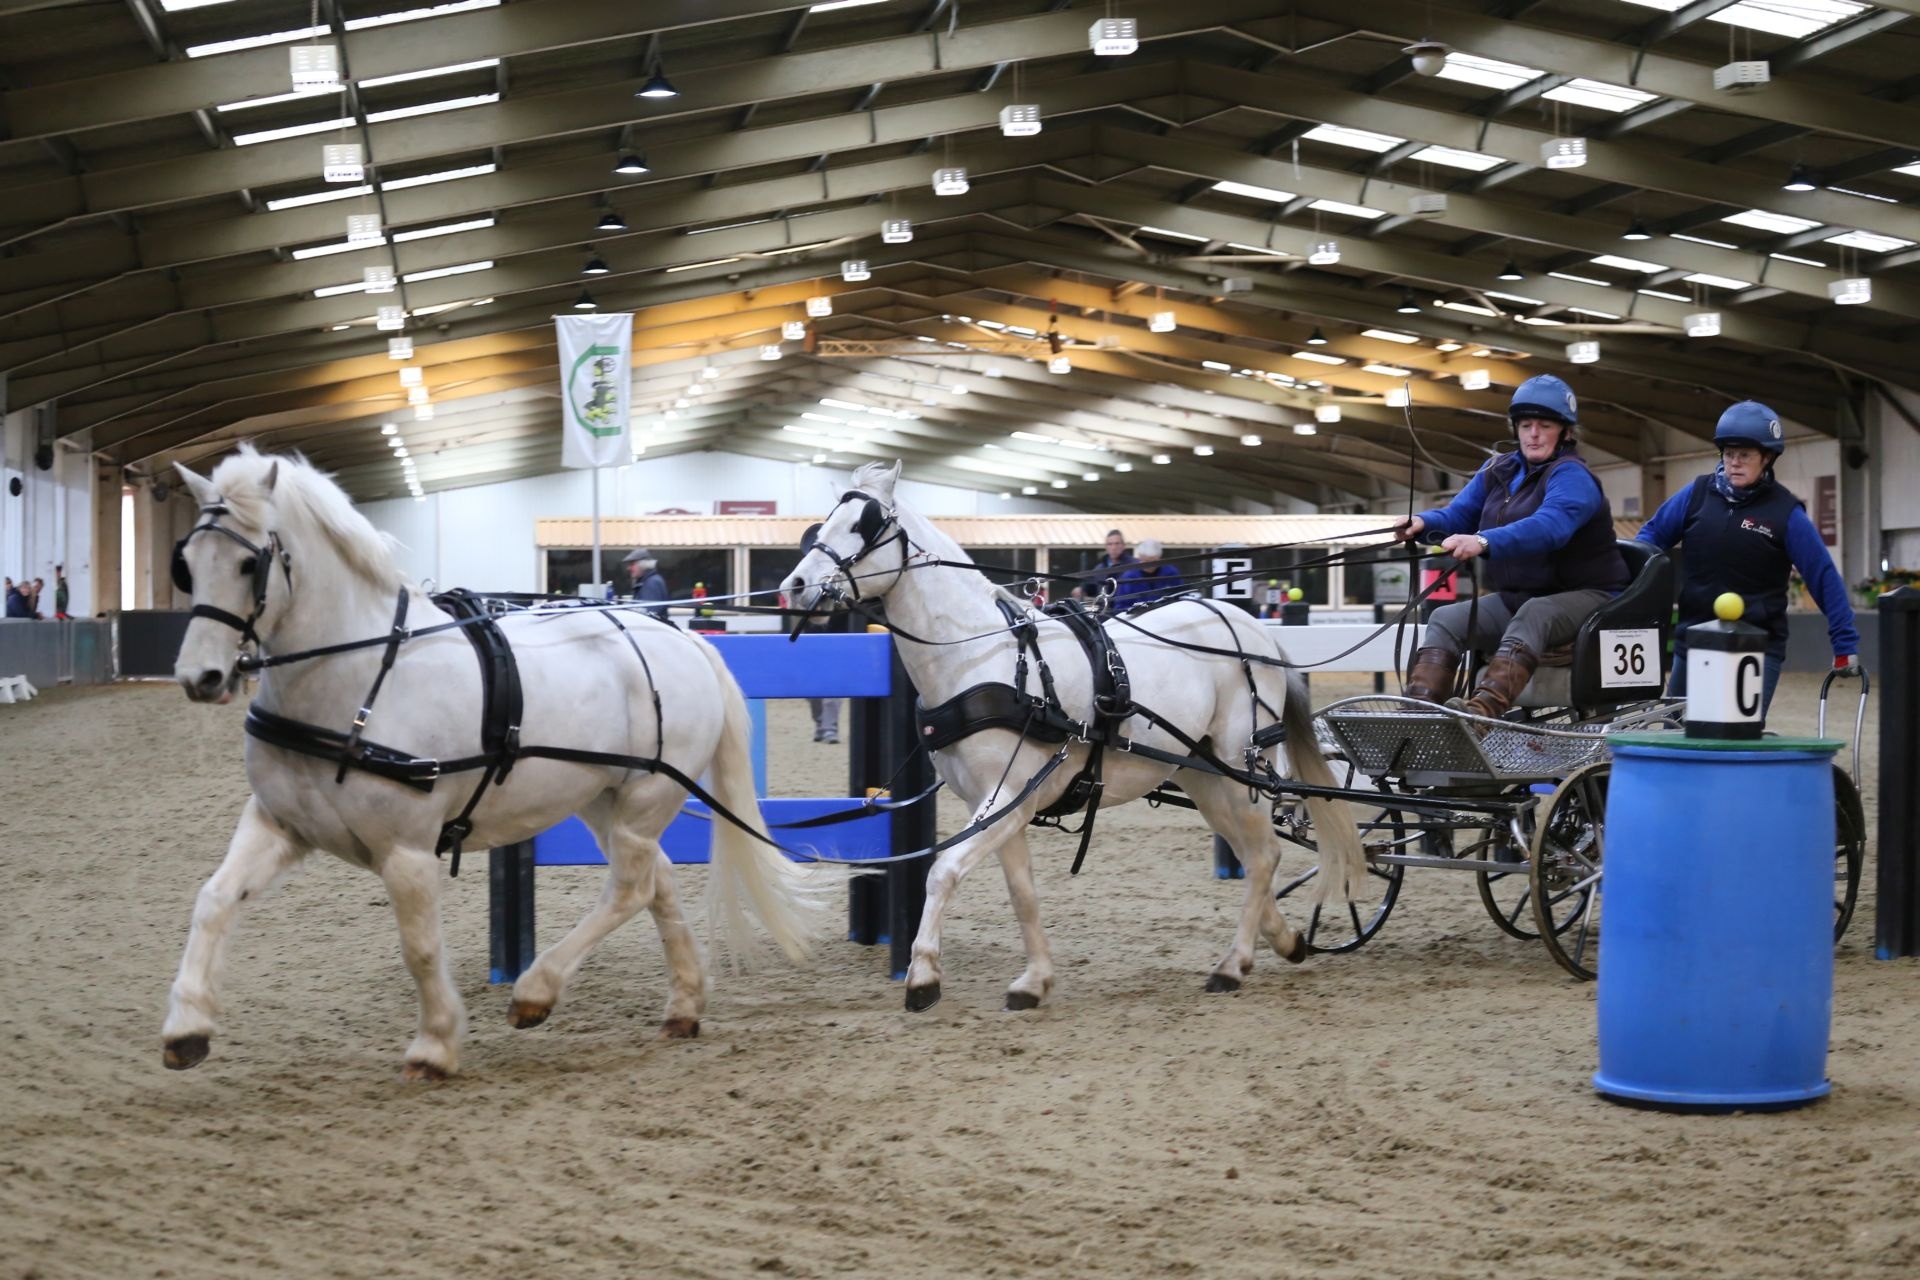 Carriage Driving, Indoor competition, United Kingdom, Equestrian sport, 1920x1280 HD Desktop